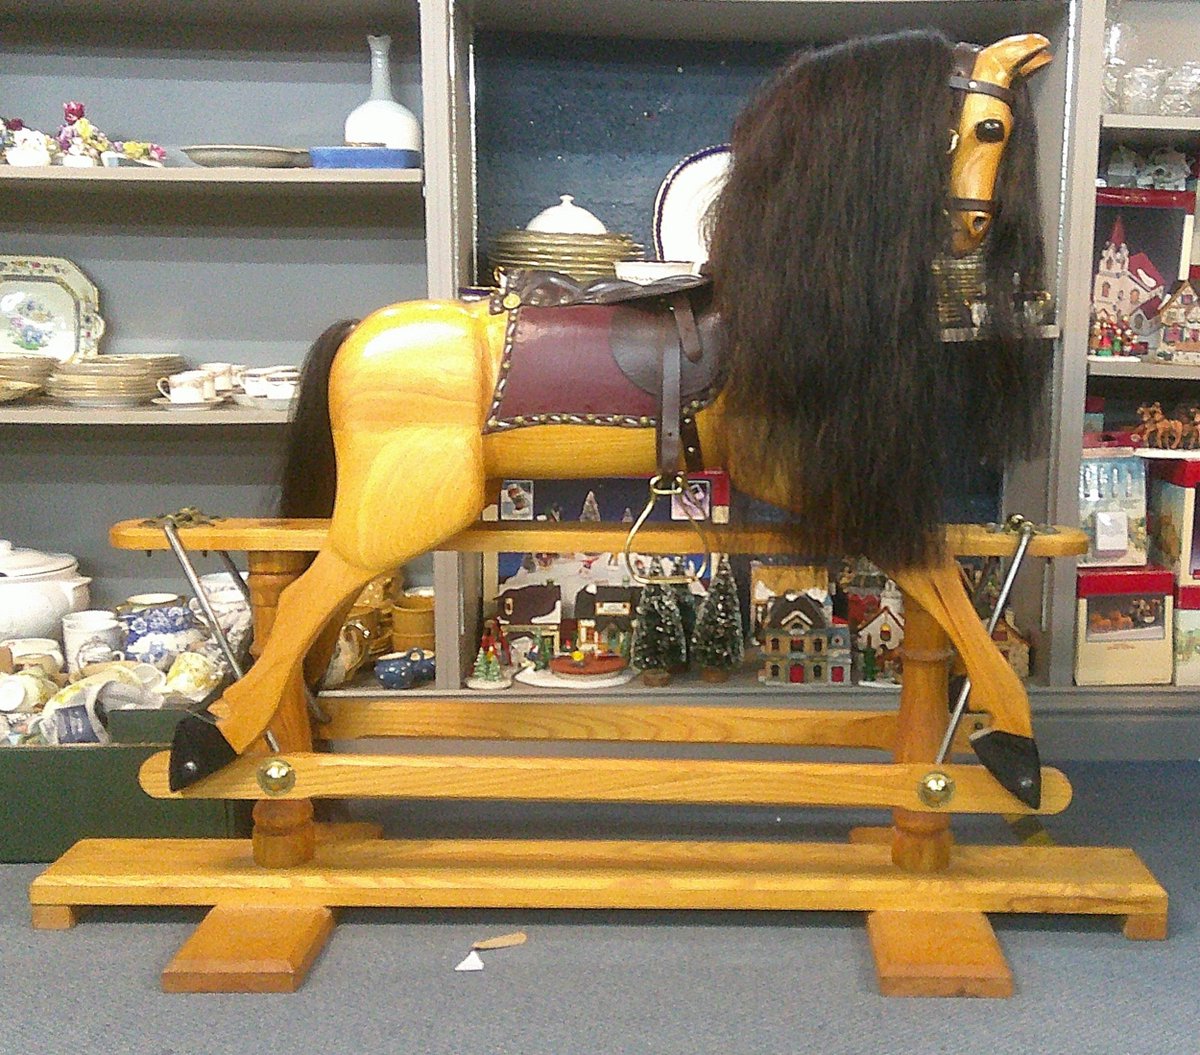 On Wednesday 8th November 2023 you can bid in an auction for a rocking horse made by our member, Terry Duffy. The auction is all on-line and starts at 10:30am (UK time). bourneendauctionrooms.co.uk/catalogue/lot/… #HSP #HereditarySpasticParaplegia #RareDisease